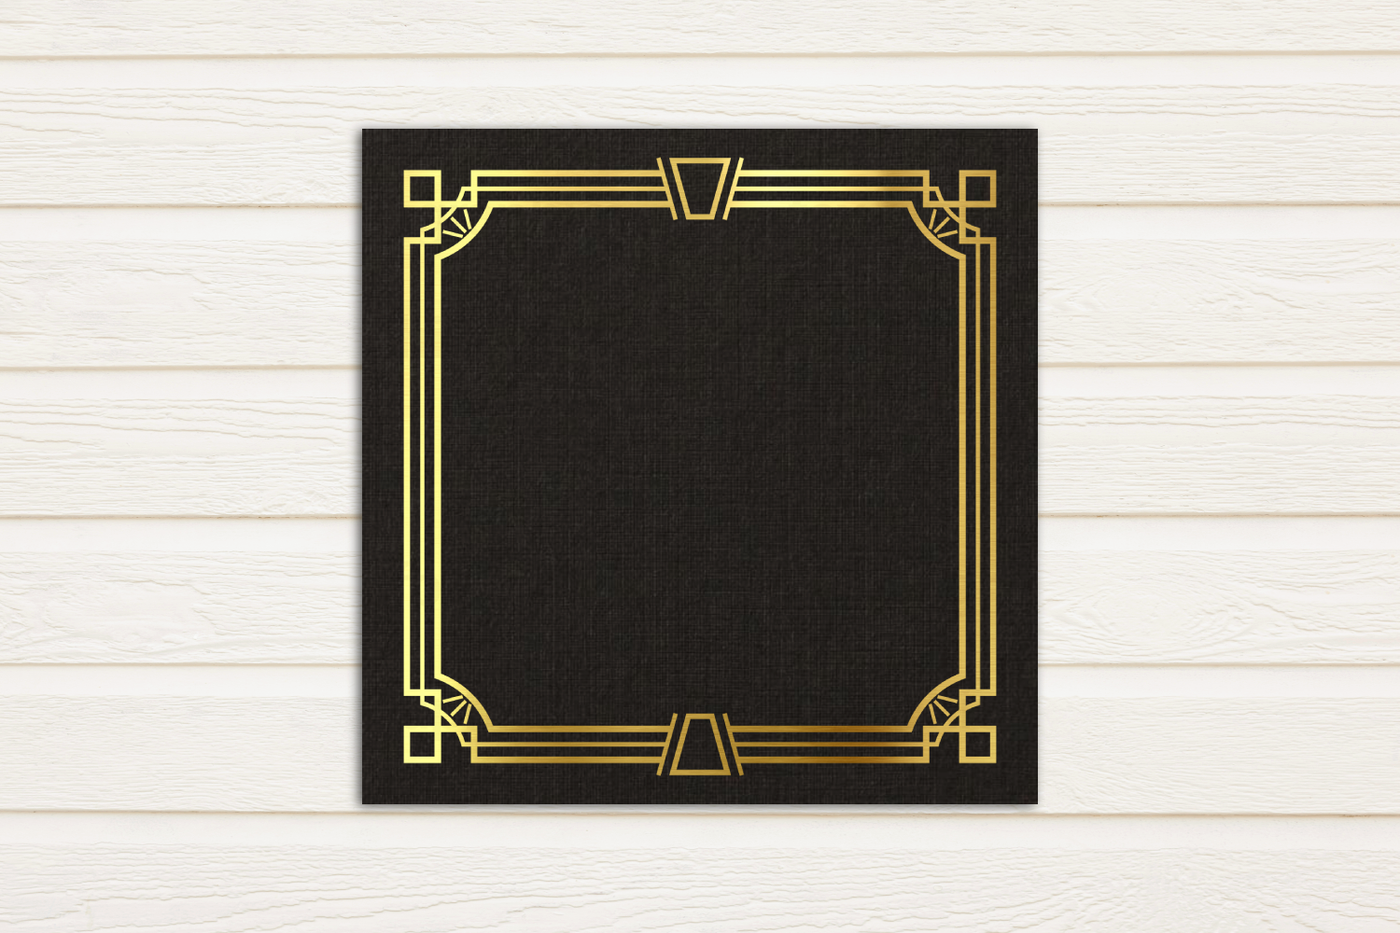 Gold art deco inspired square border design on a black square piece of paper. The paper sits on a white painted wood background.